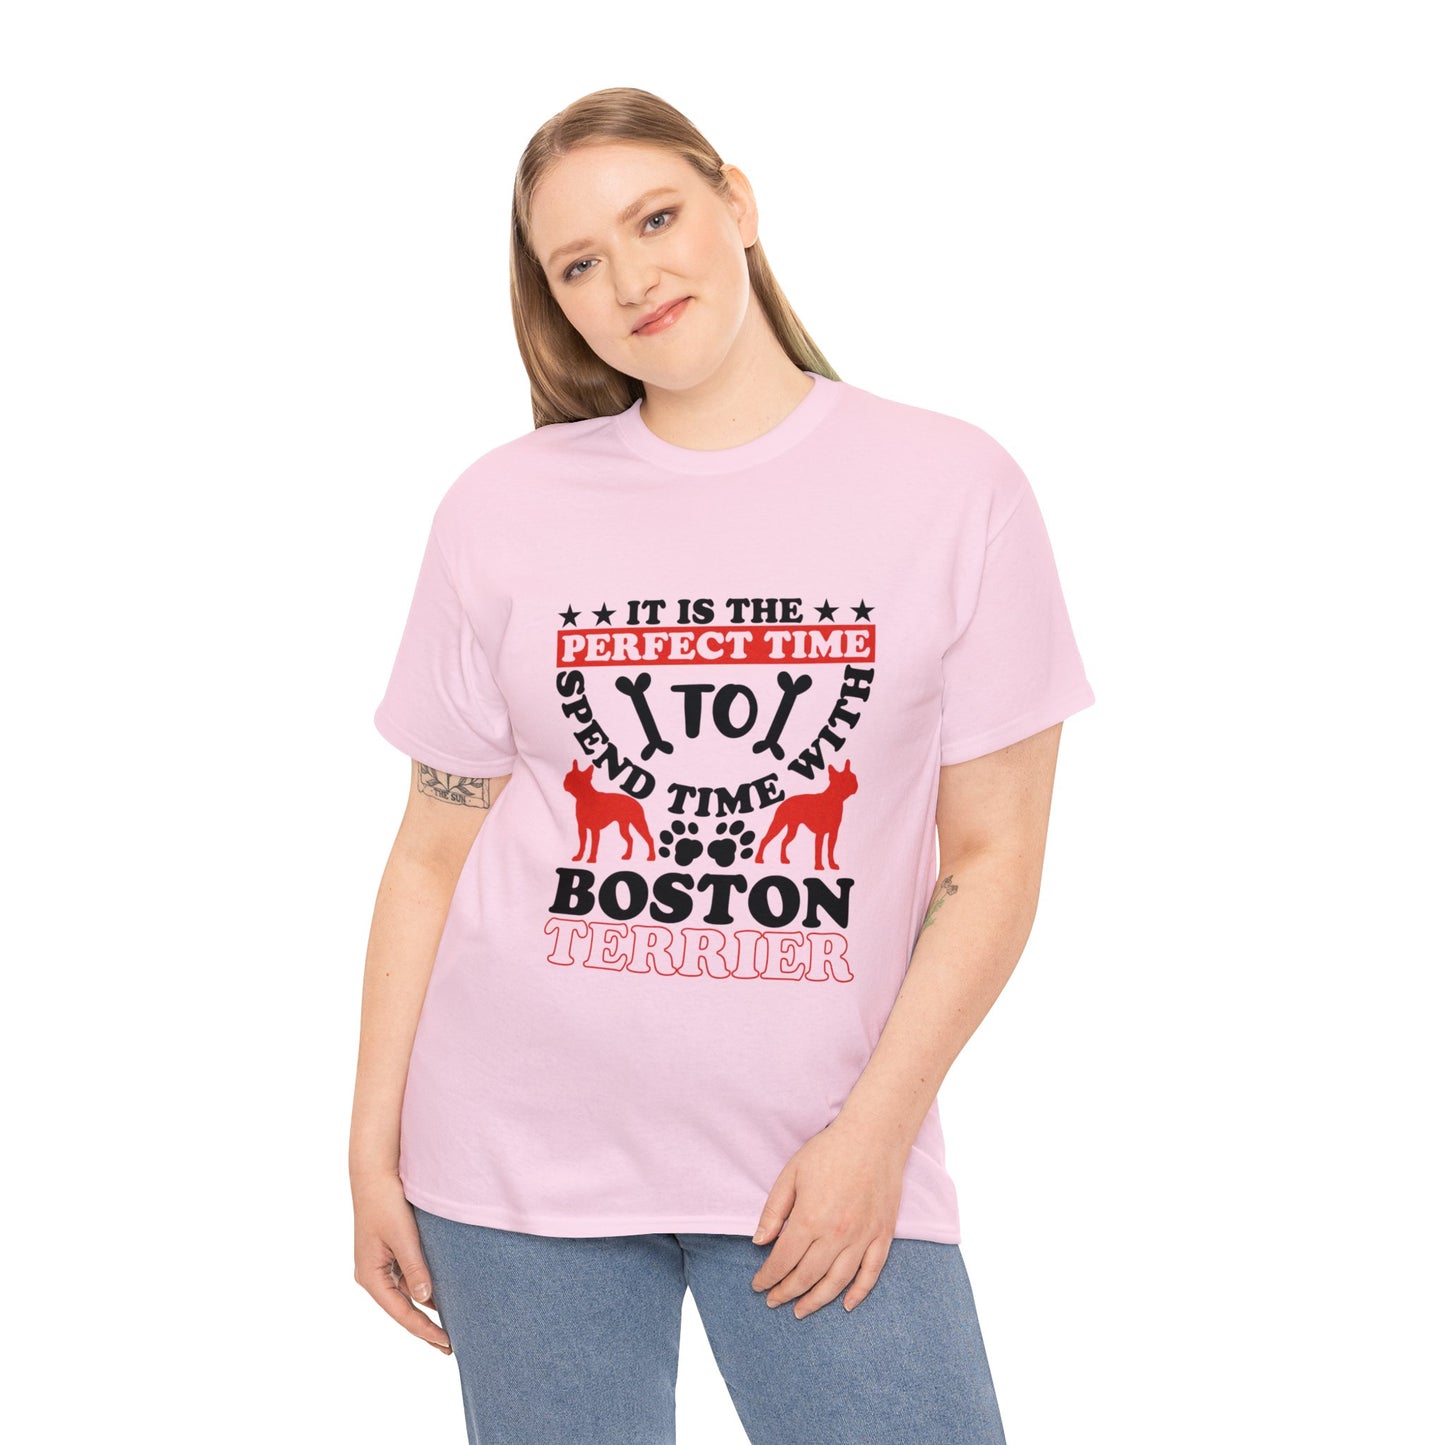 Sophie - Unisex Tshirts for Boston Terrier Lovers